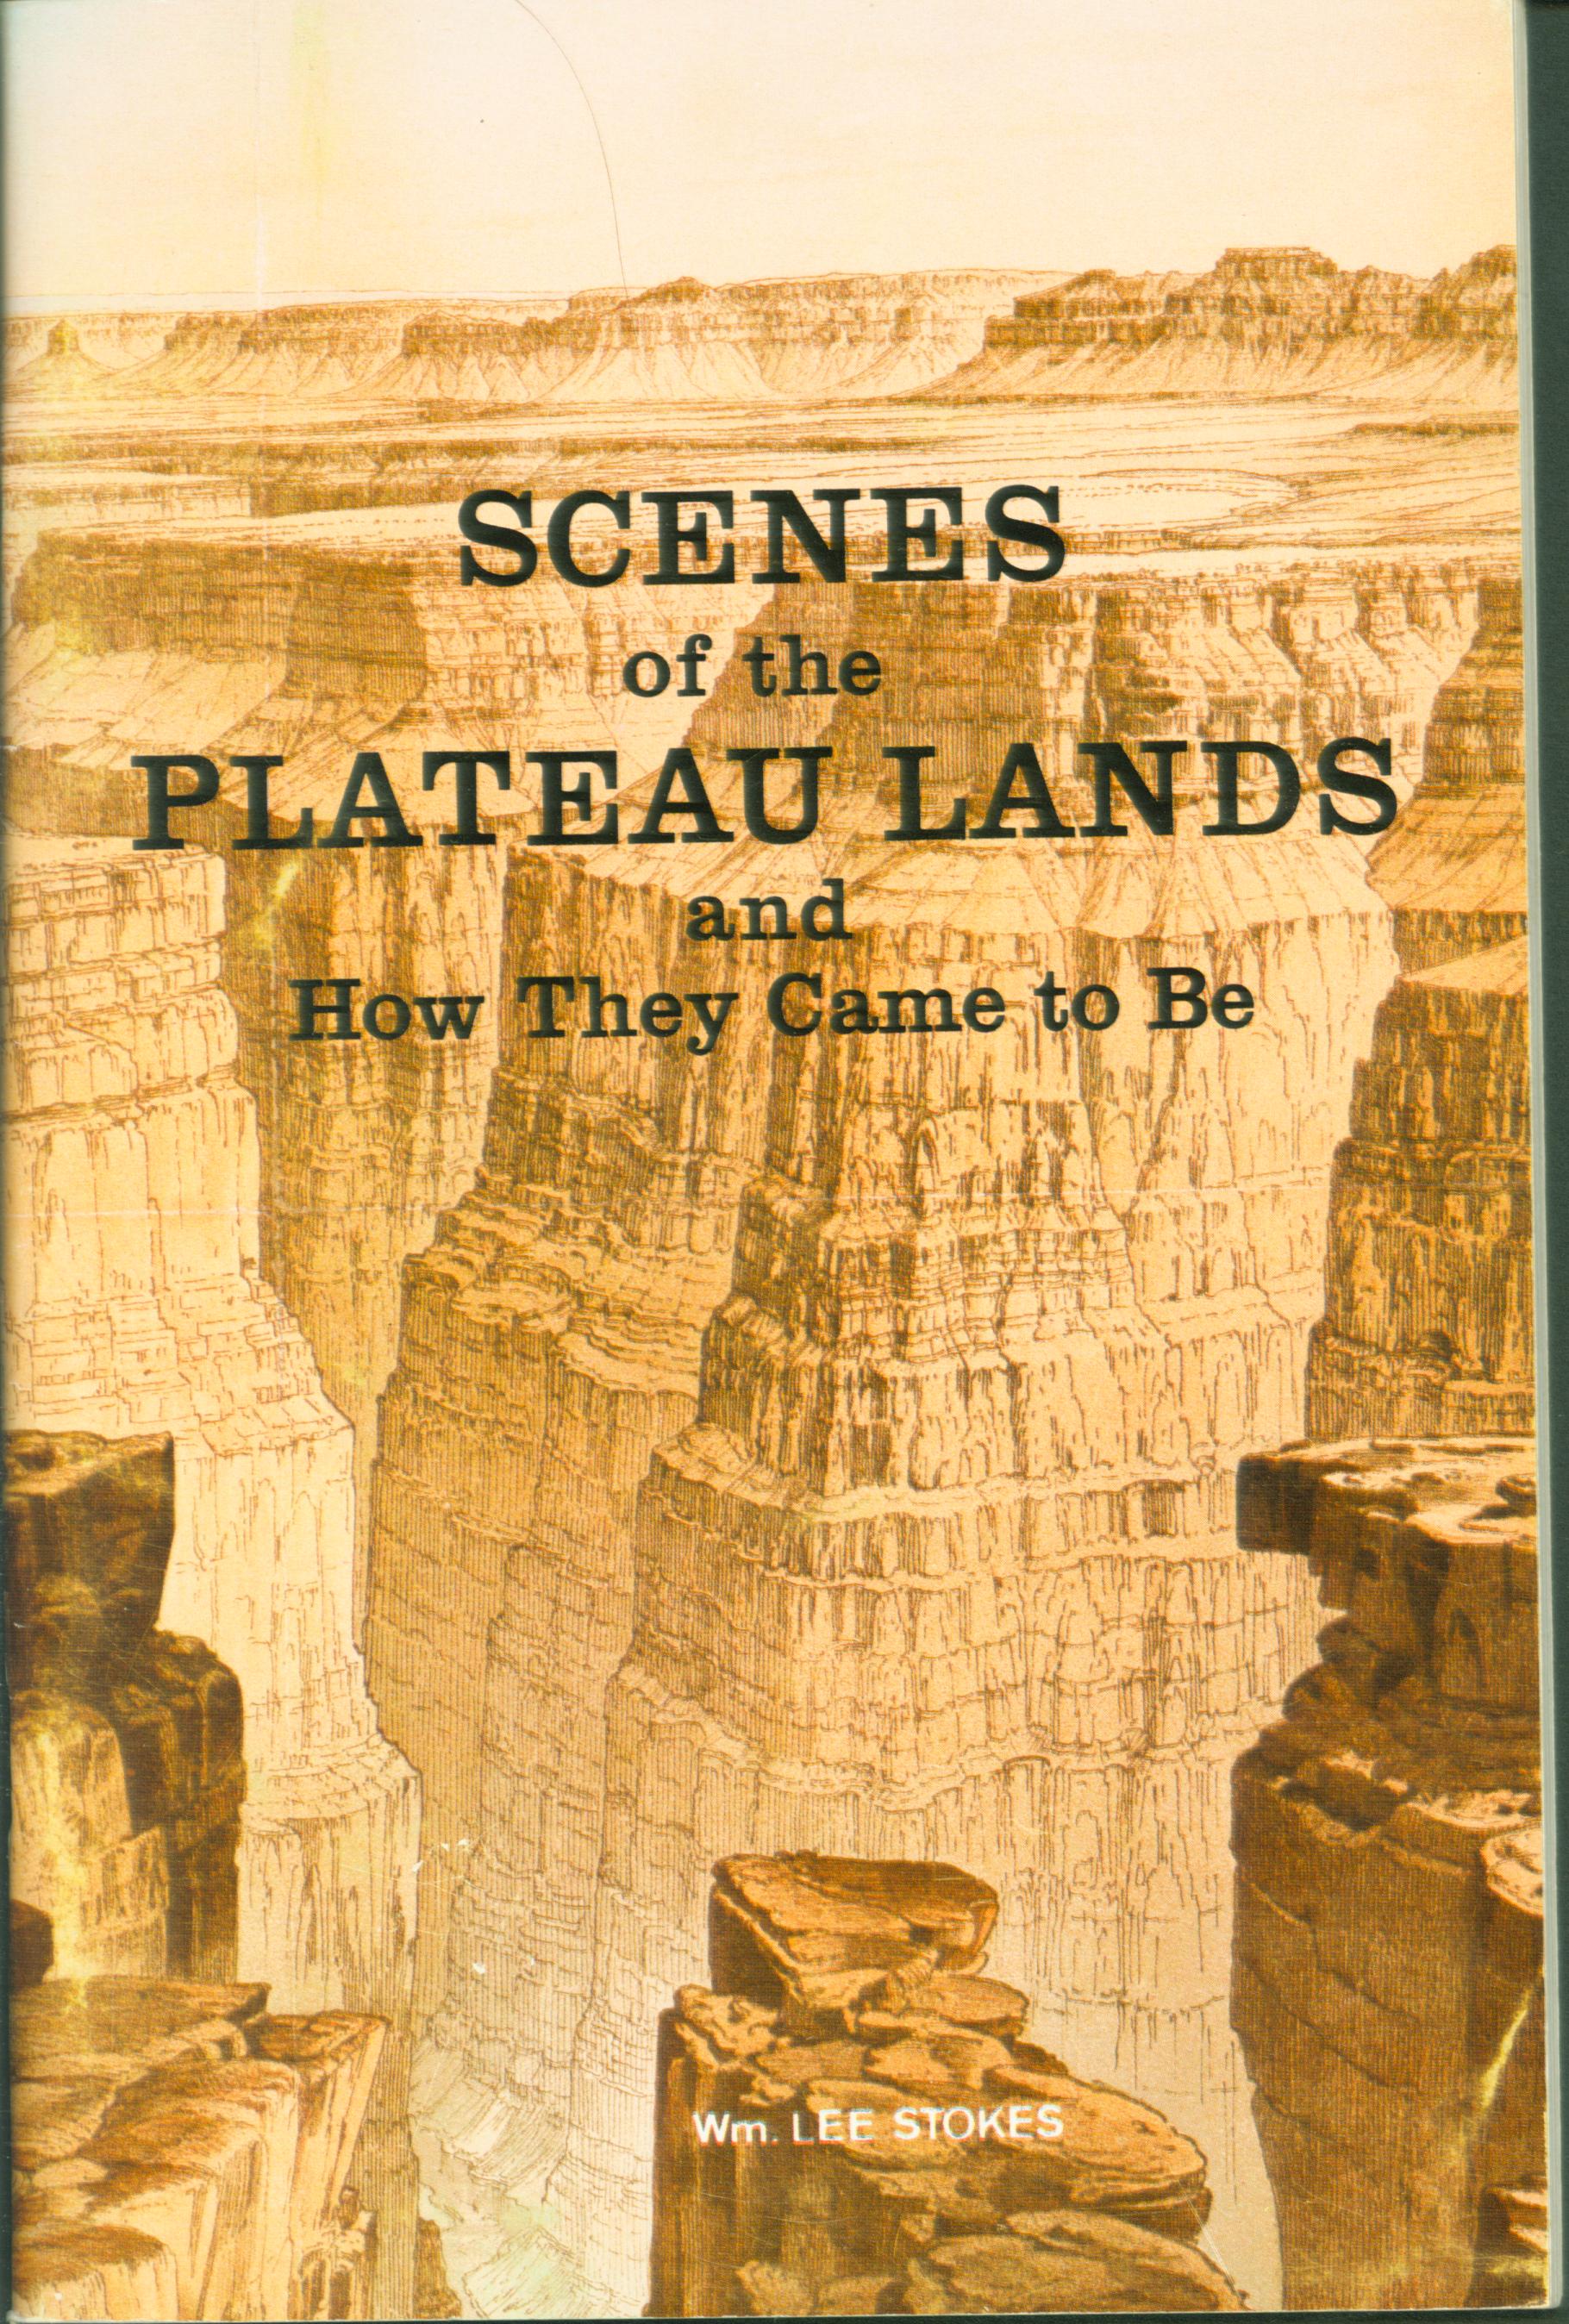 SCENES OF THE PLATEAU LANDS and how they came to be.